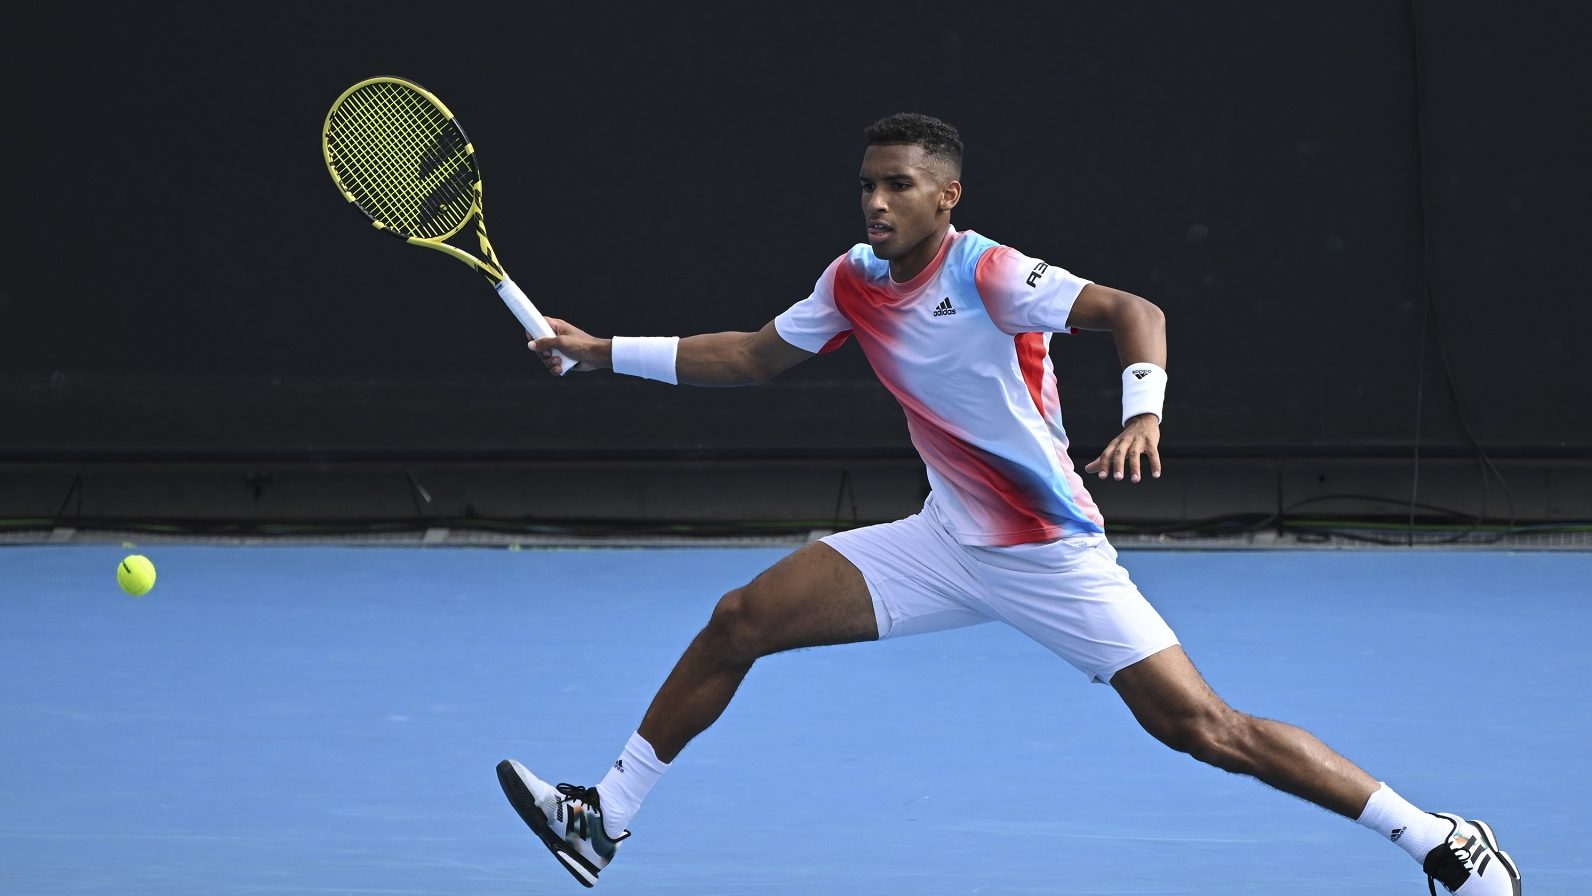 Auger-Aliassime comes up clutch to advance in Australian Open thriller